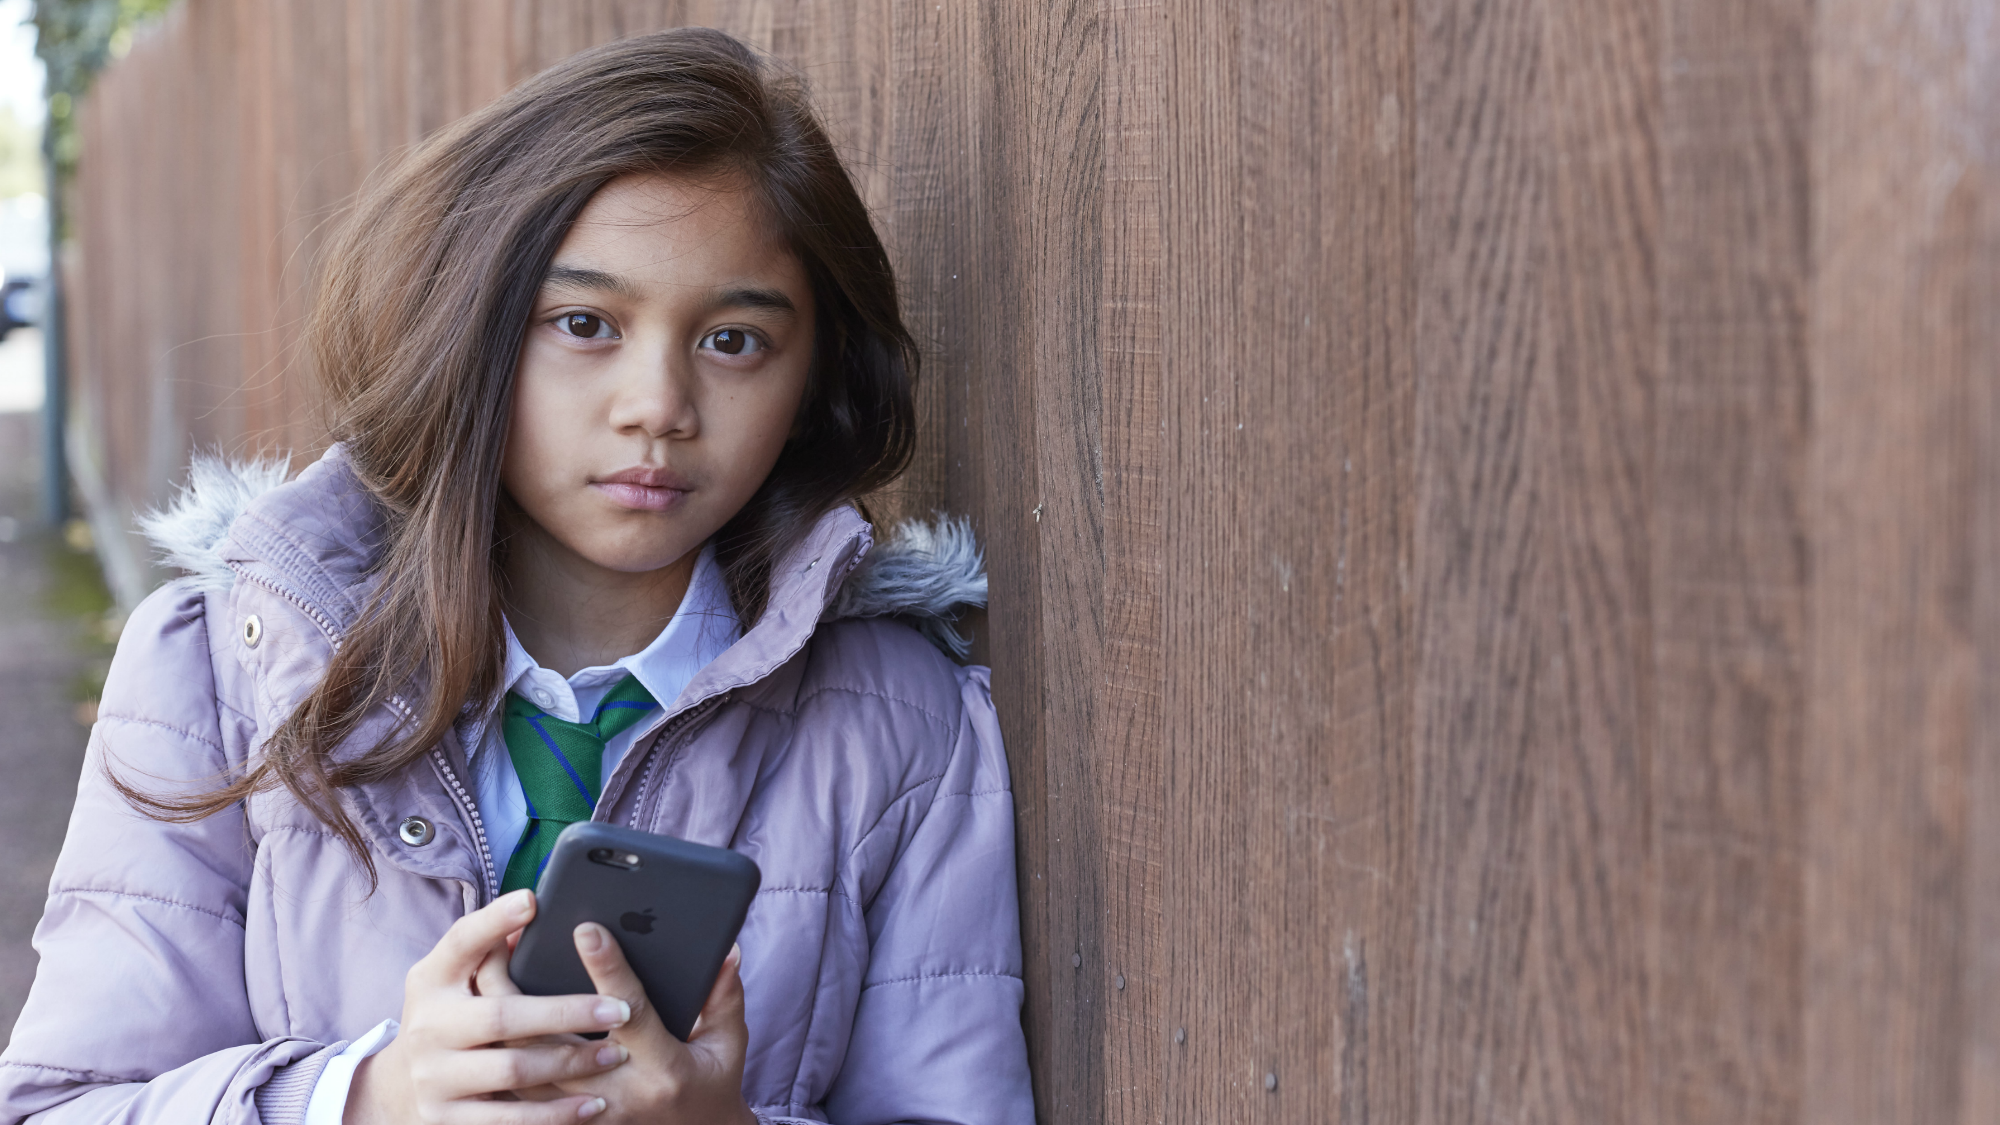 Young girl leaning against fence, holding phone